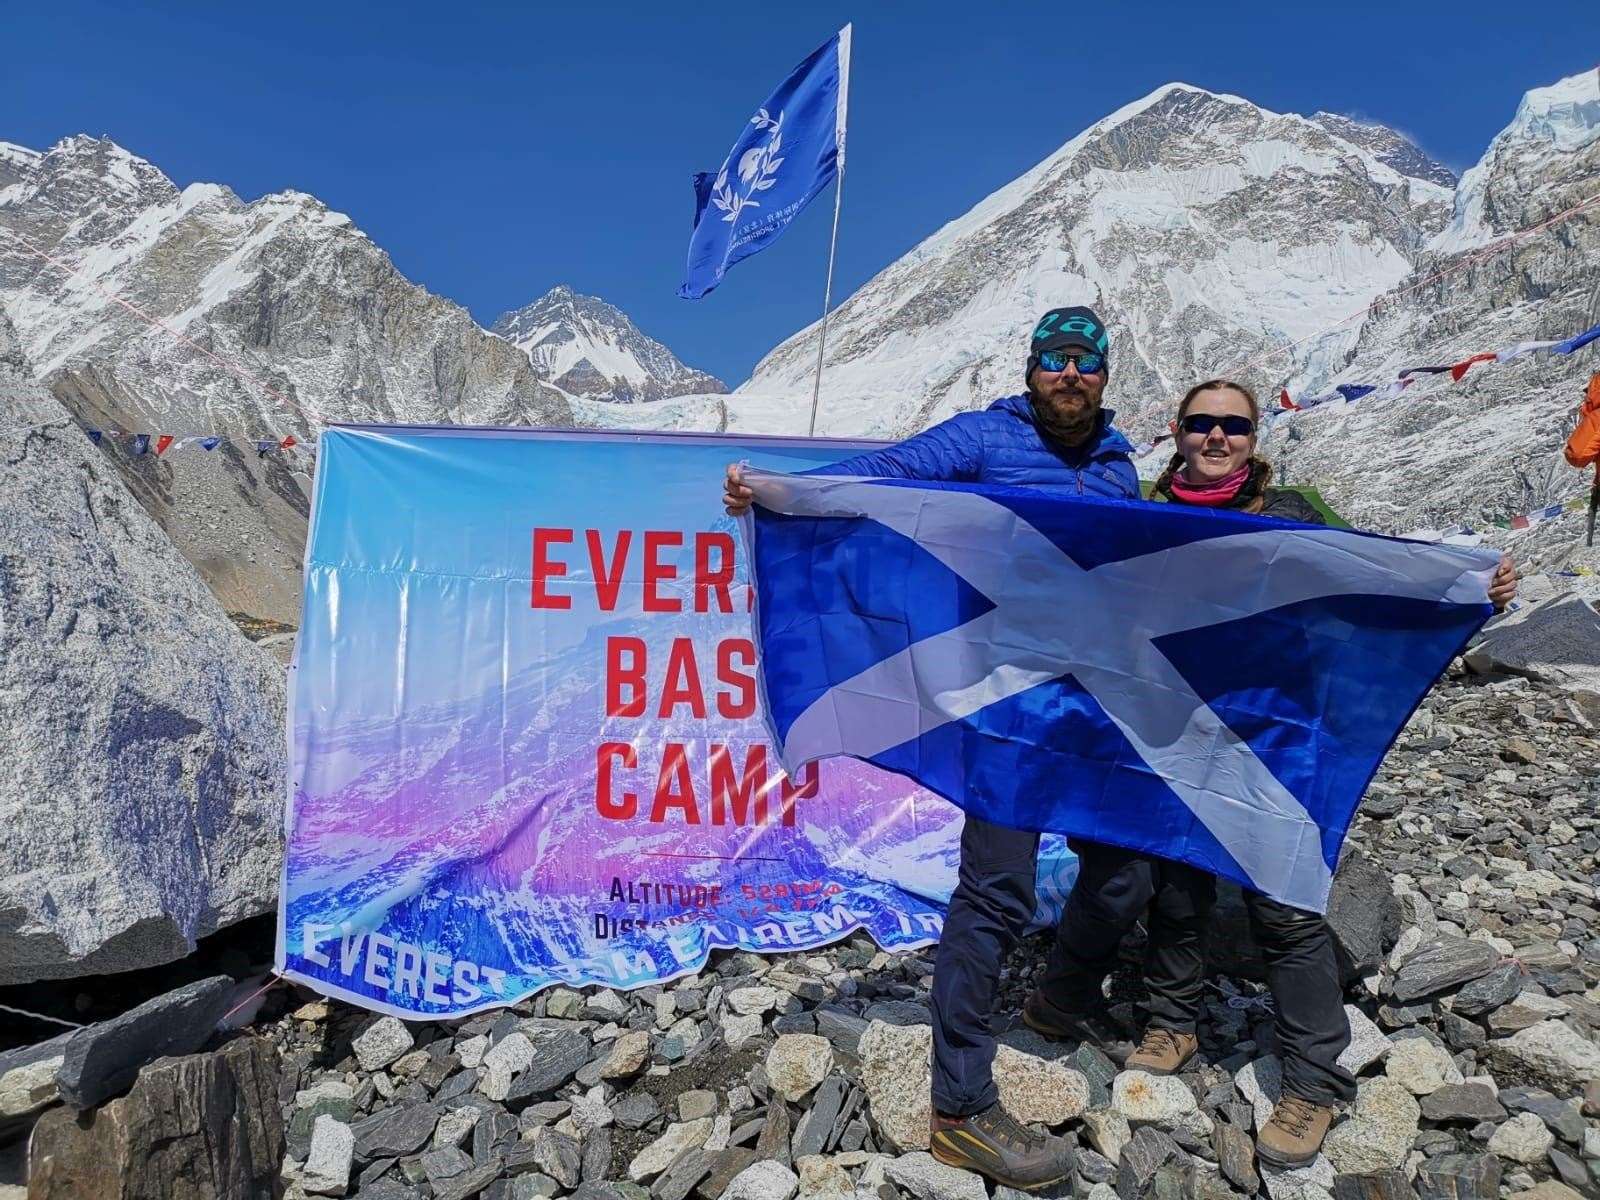 Hayley and Jamie celebrate reaching the Everest base camp.